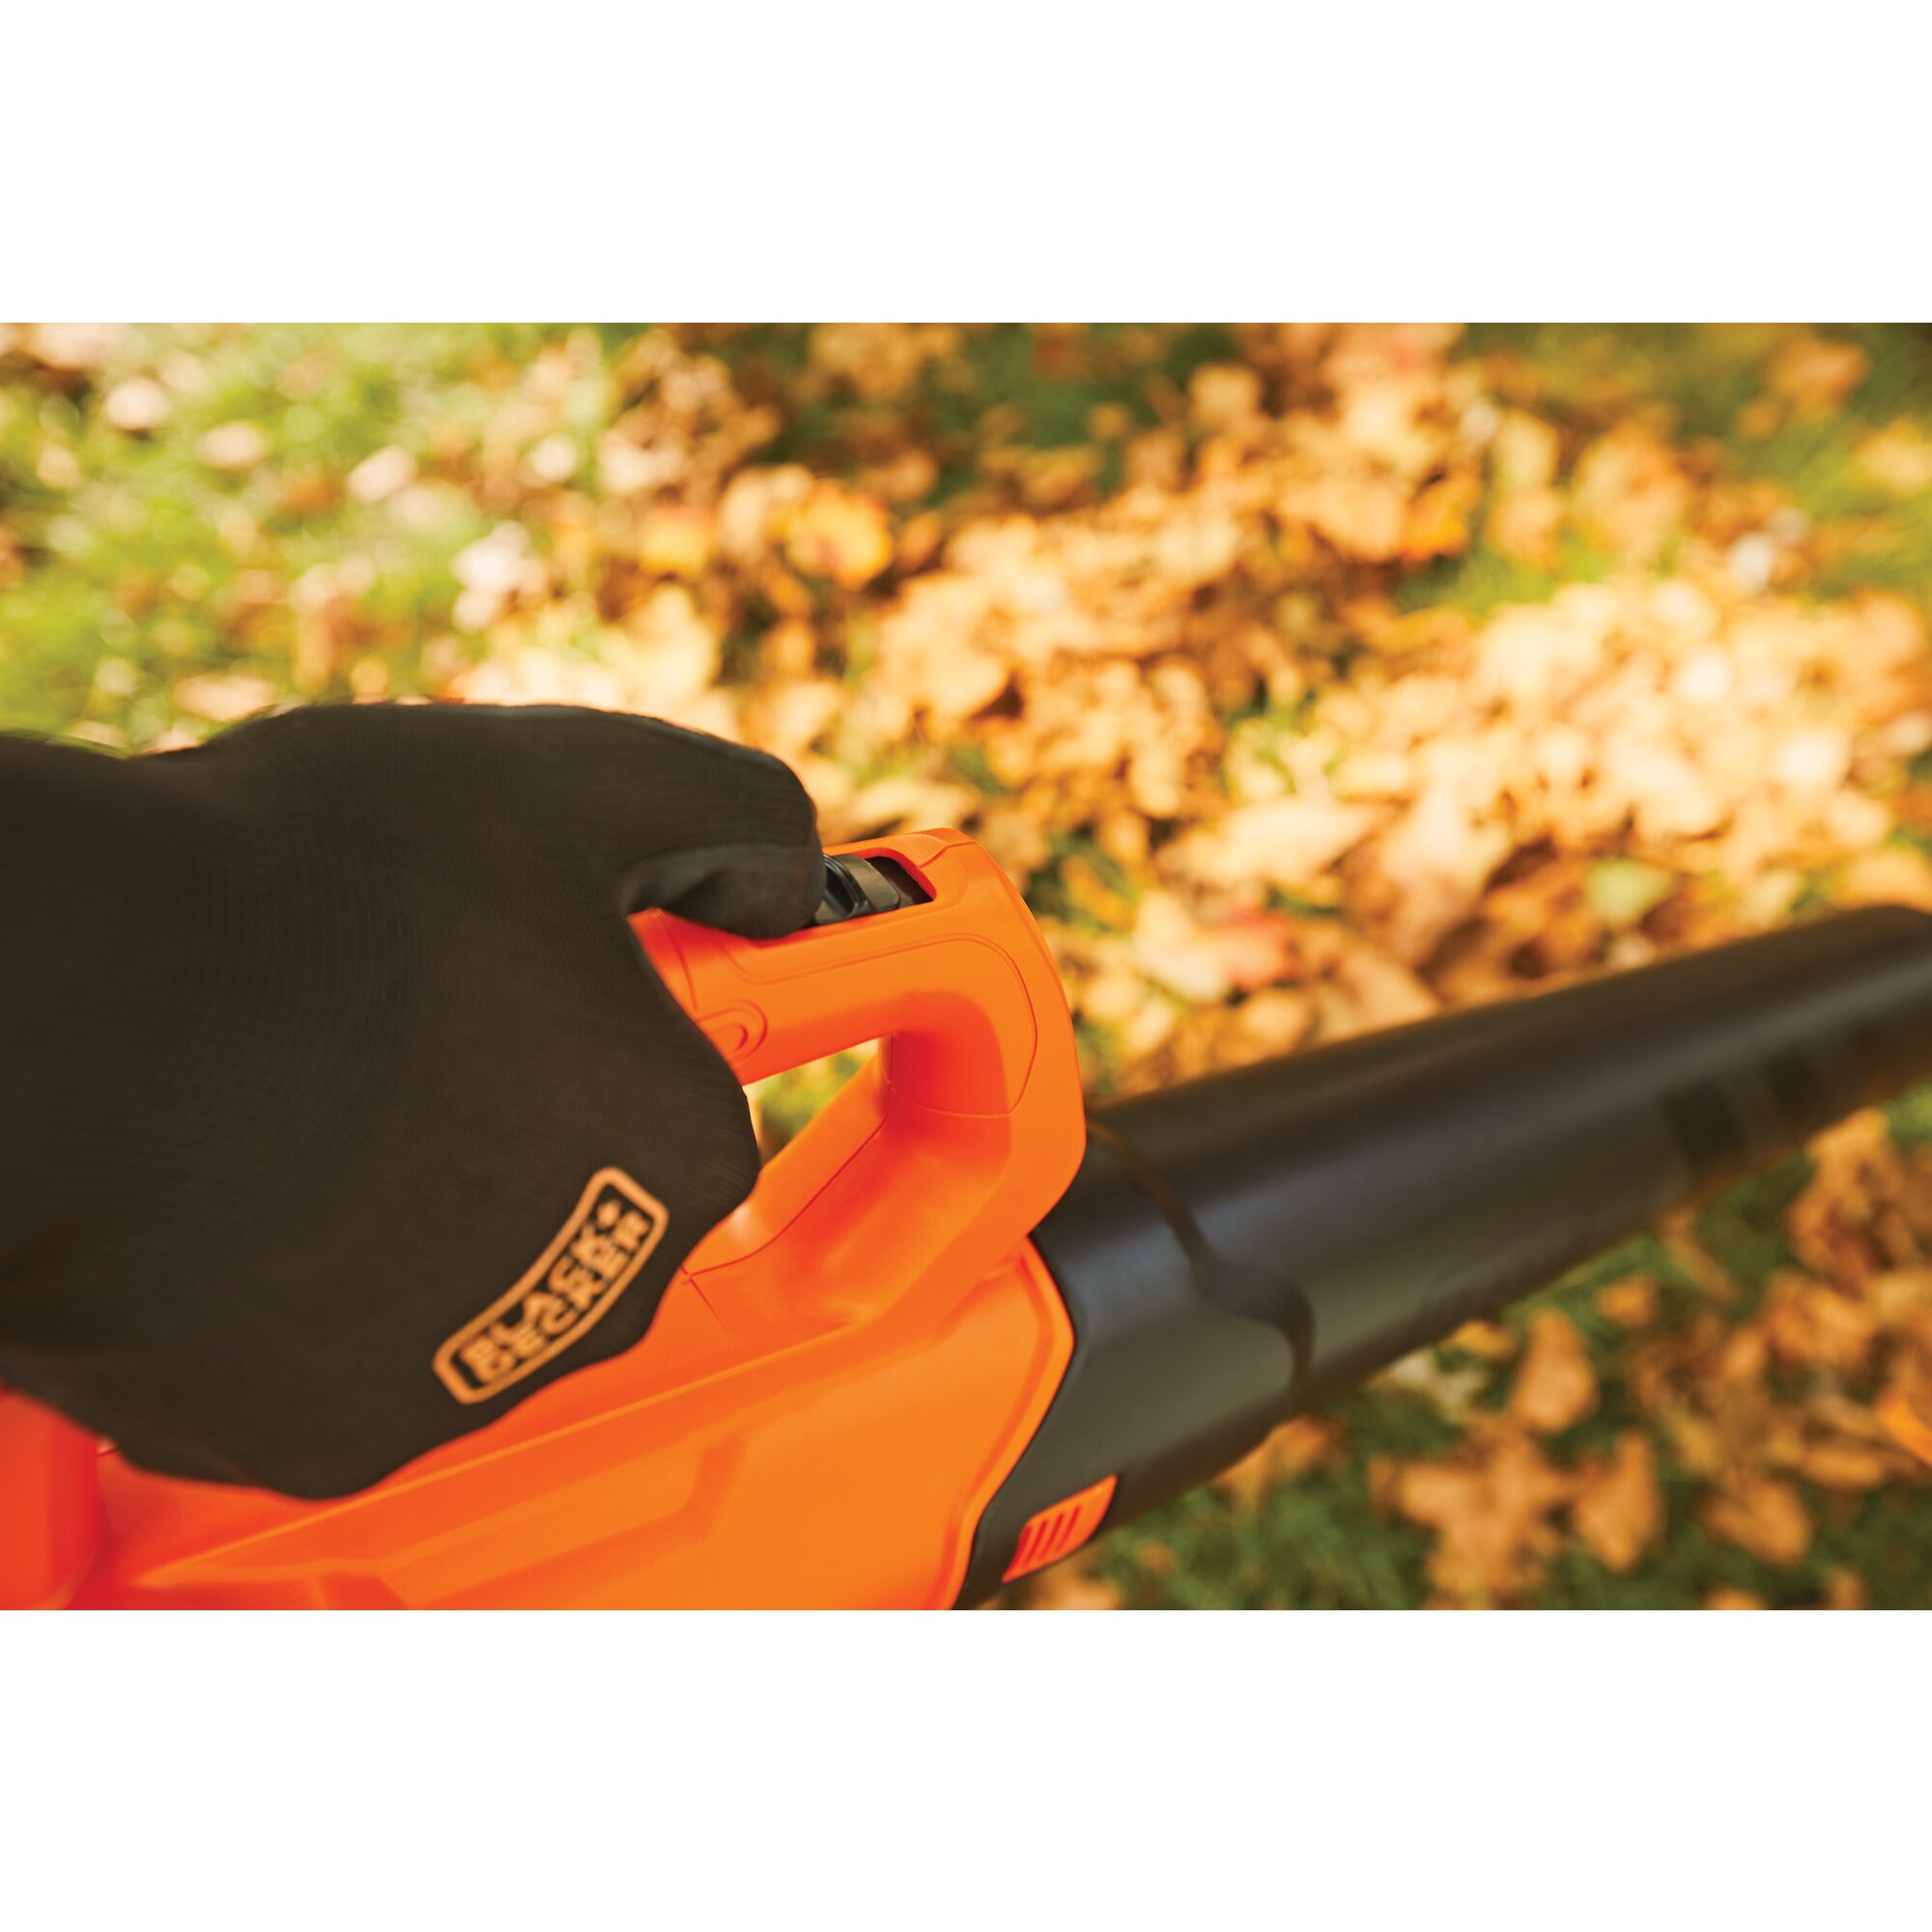 2 speed control feature of 20 Volt Axial Leaf Blower.